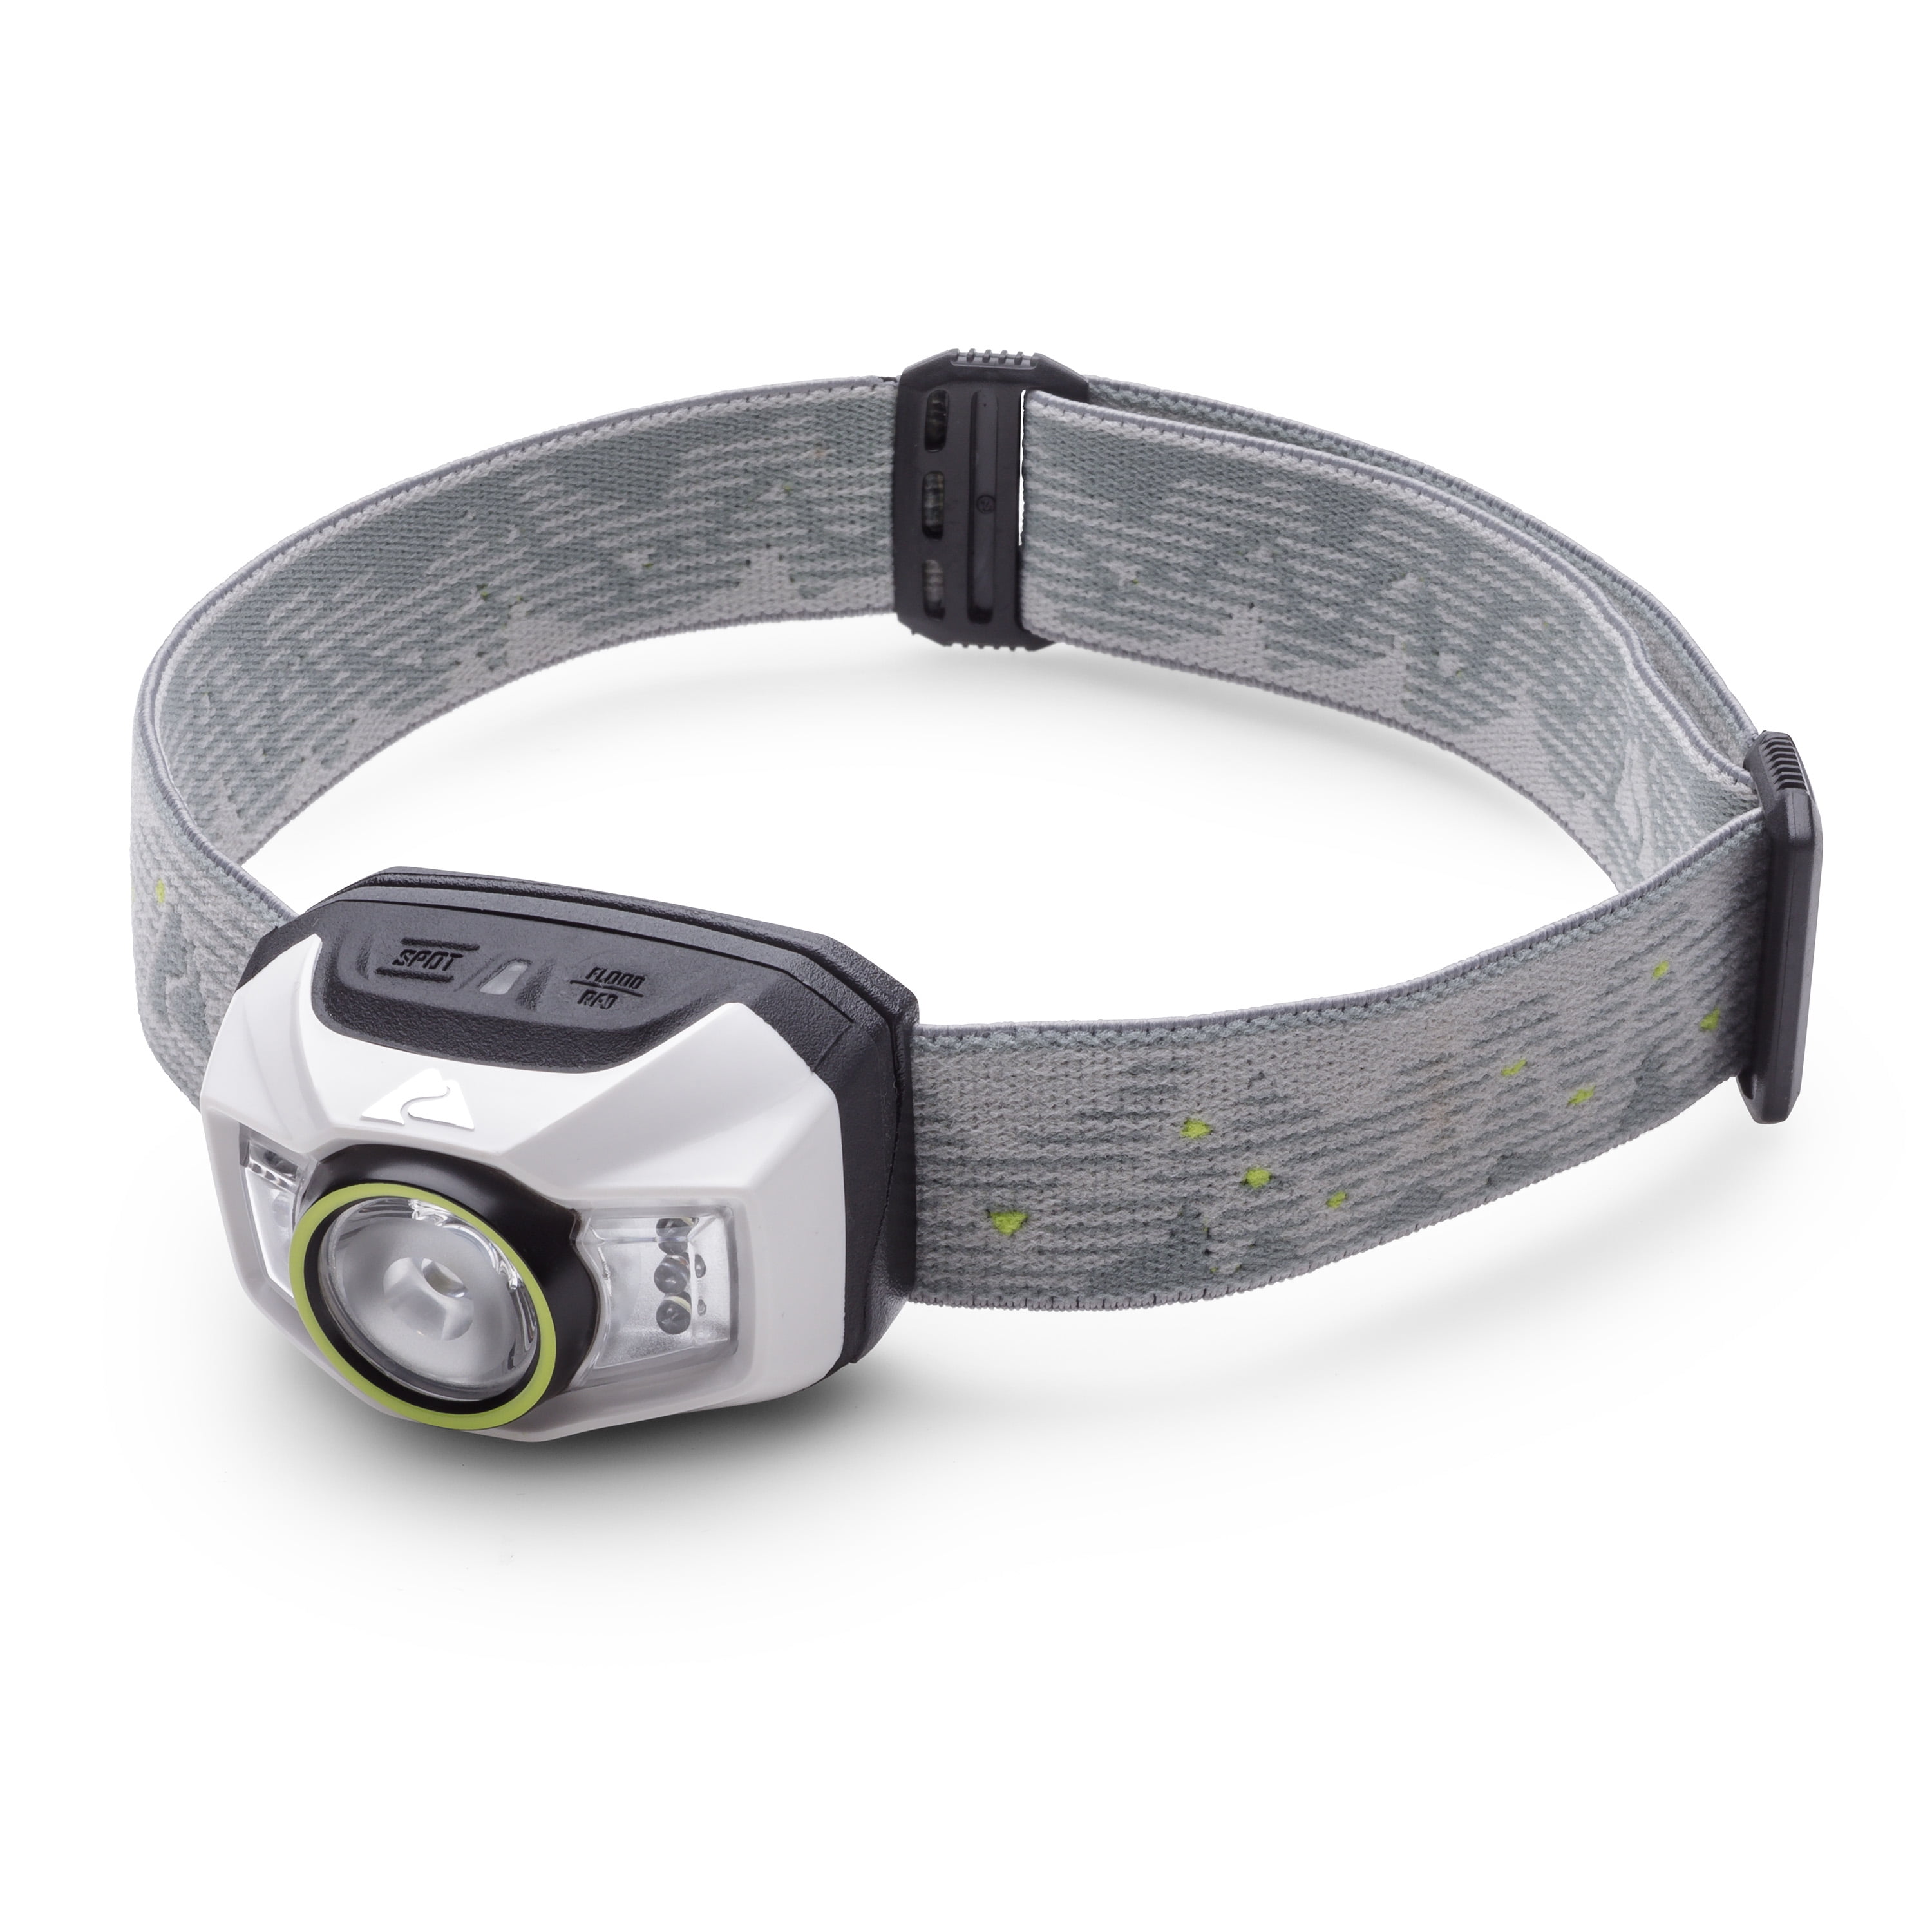 Details about  / LED Headlight Waterproof Head Torch Headlamp Camping Fishing Hiking 3 Modes